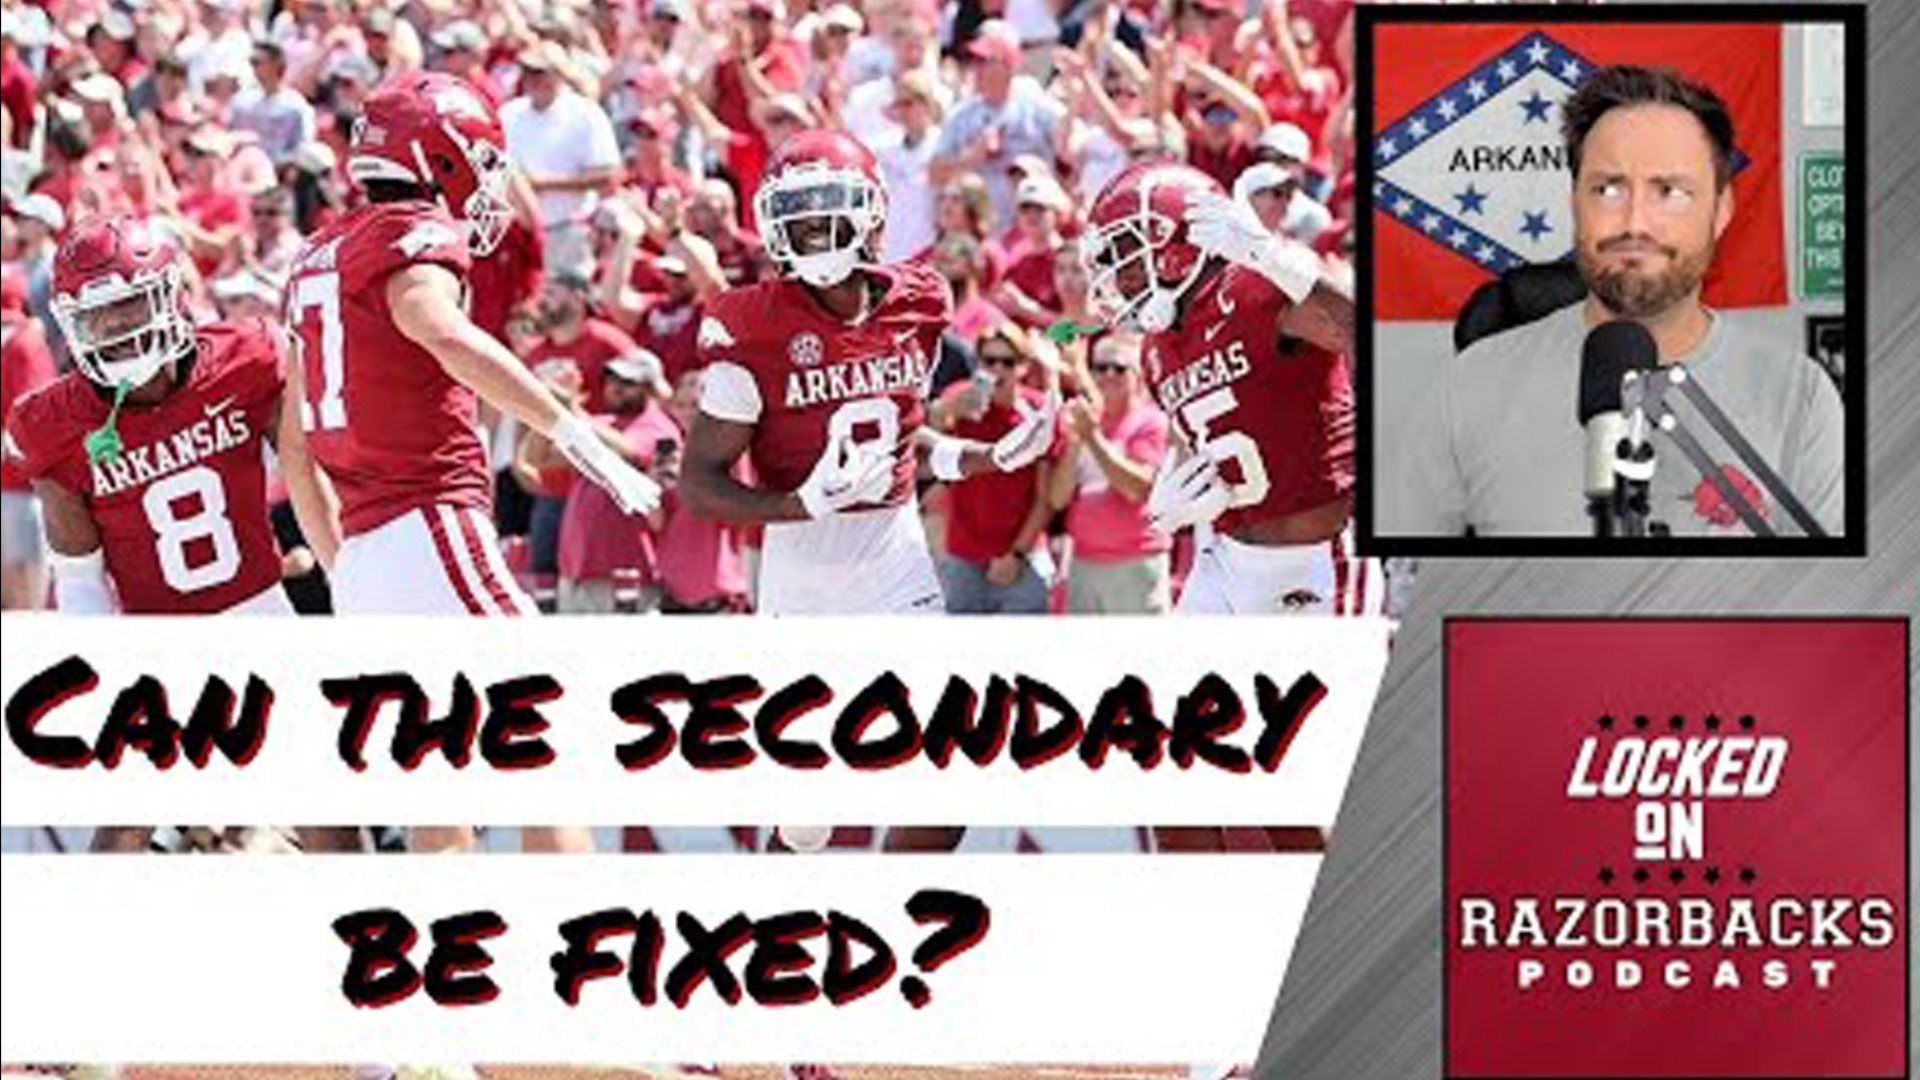 The glaring issue of the Razorback pass defense, what Sam Pittman says can be done to fix it and can the other position groups make up for their weakness.